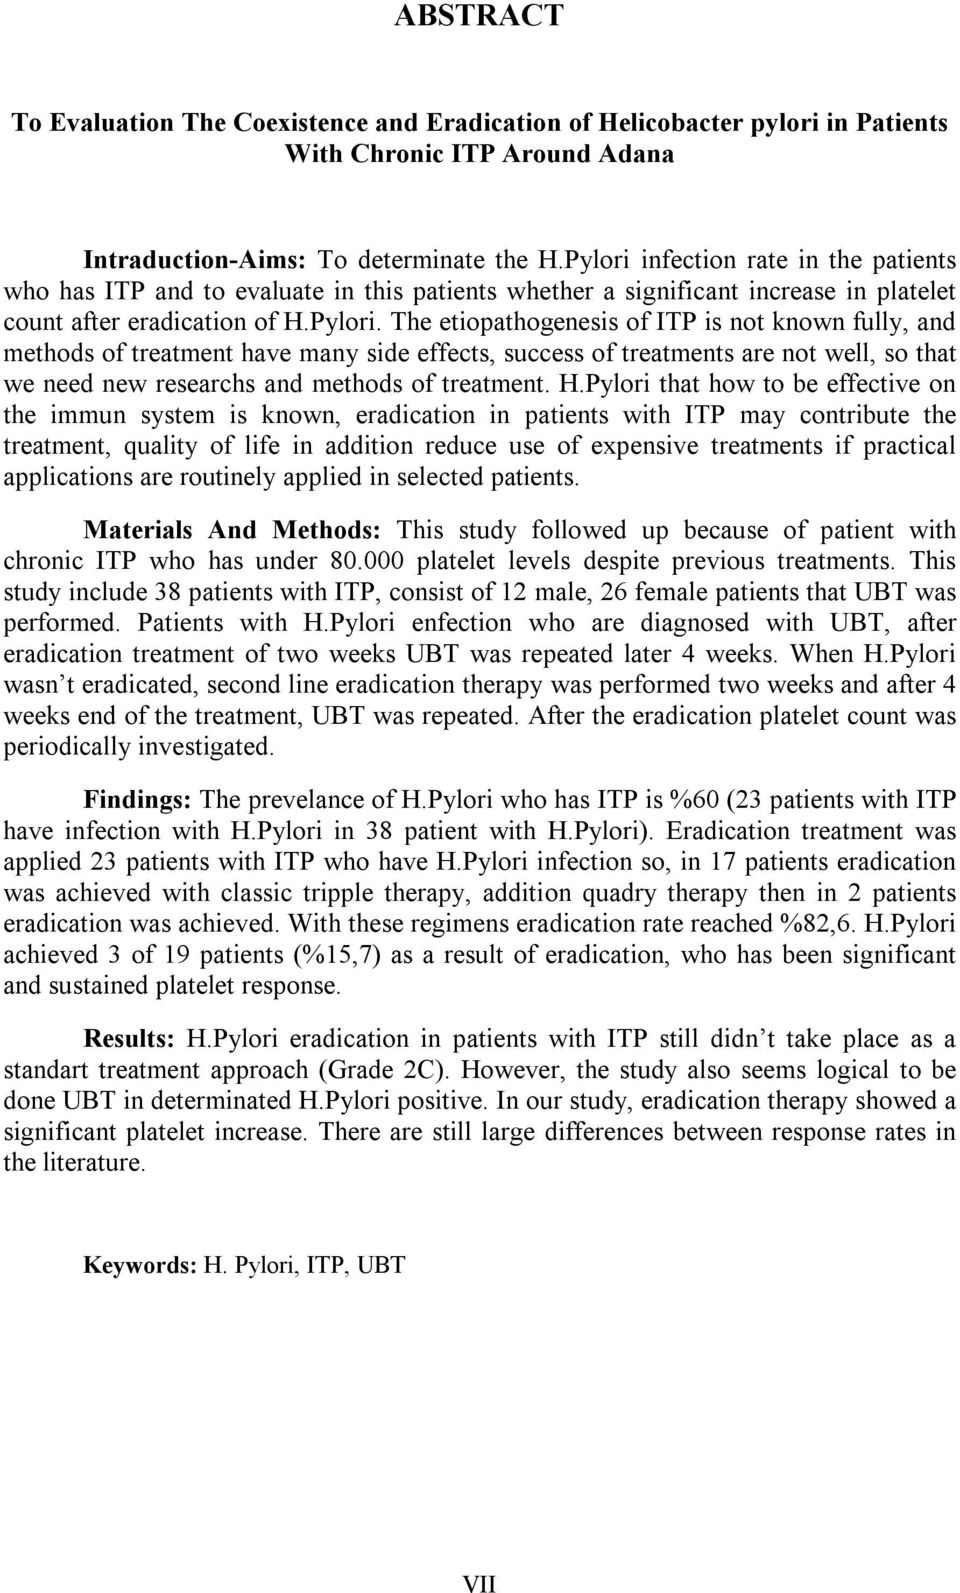 H.Pylori that how to be effective on the immun system is known, eradication in patients with ITP may contribute the treatment, quality of life in addition reduce use of expensive treatments if